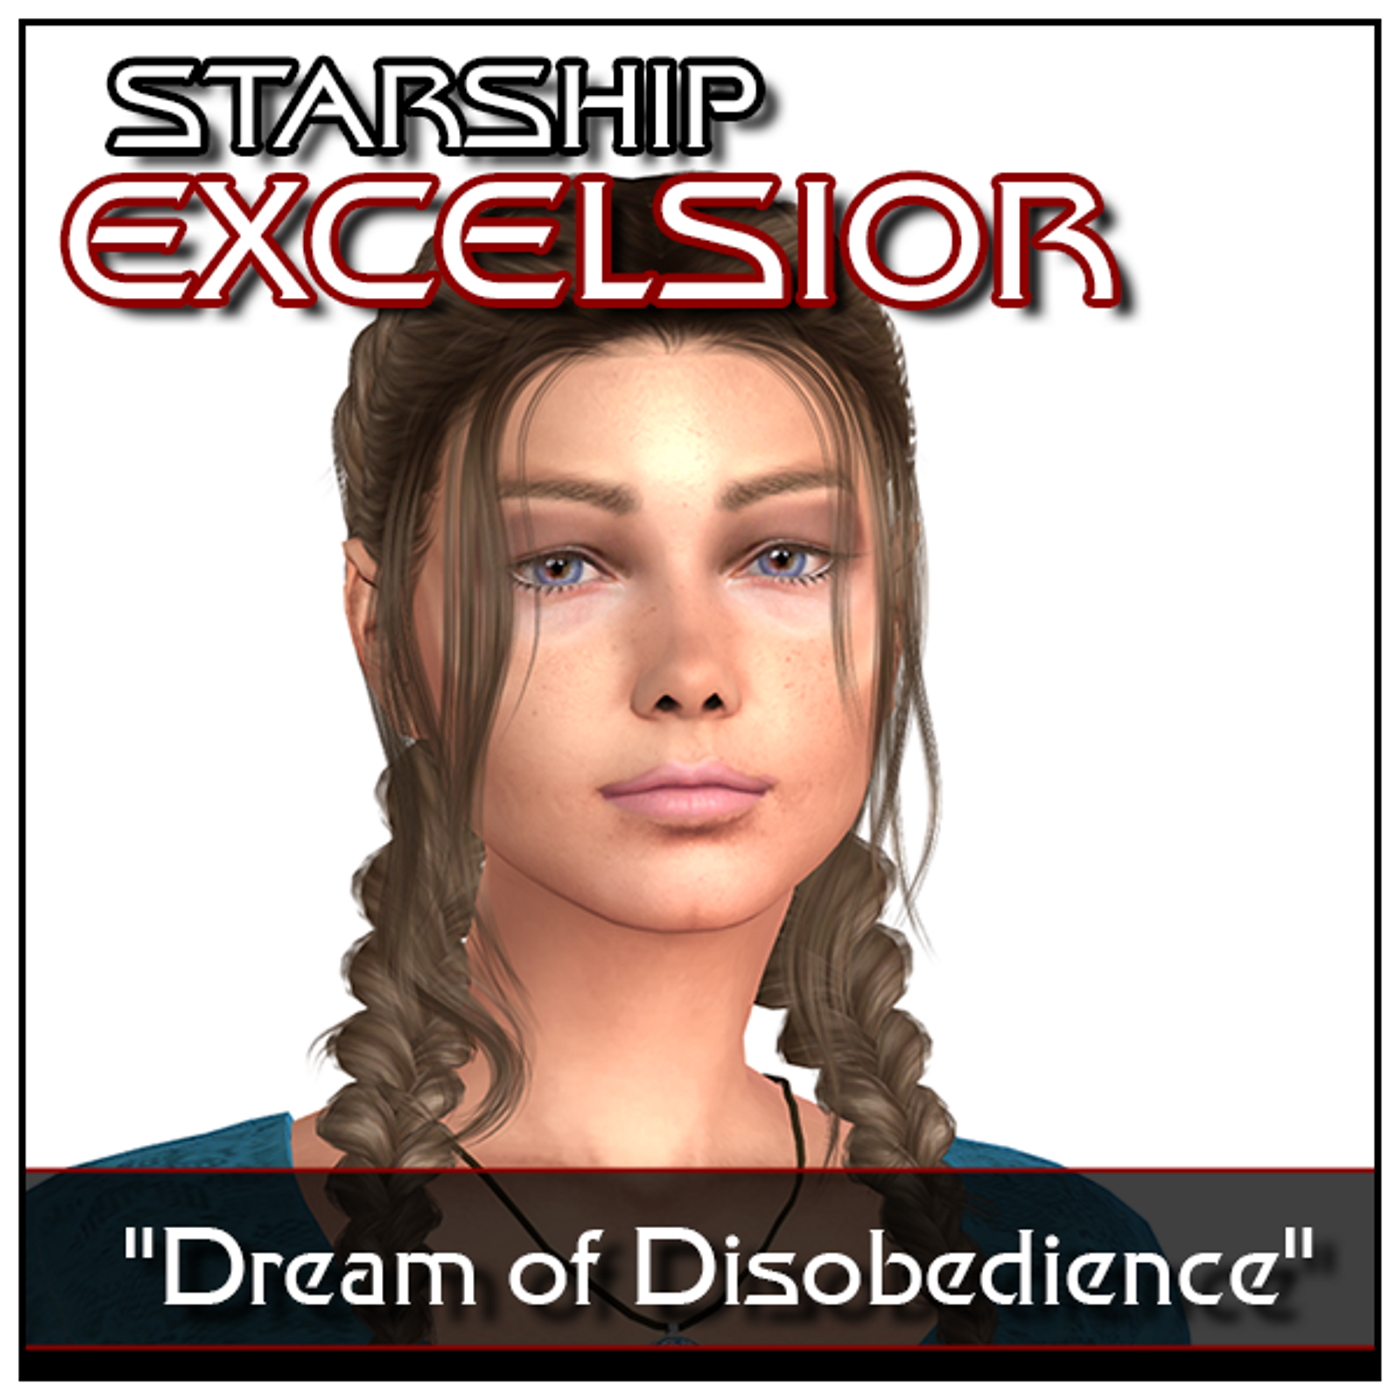 Dream of Disobedience